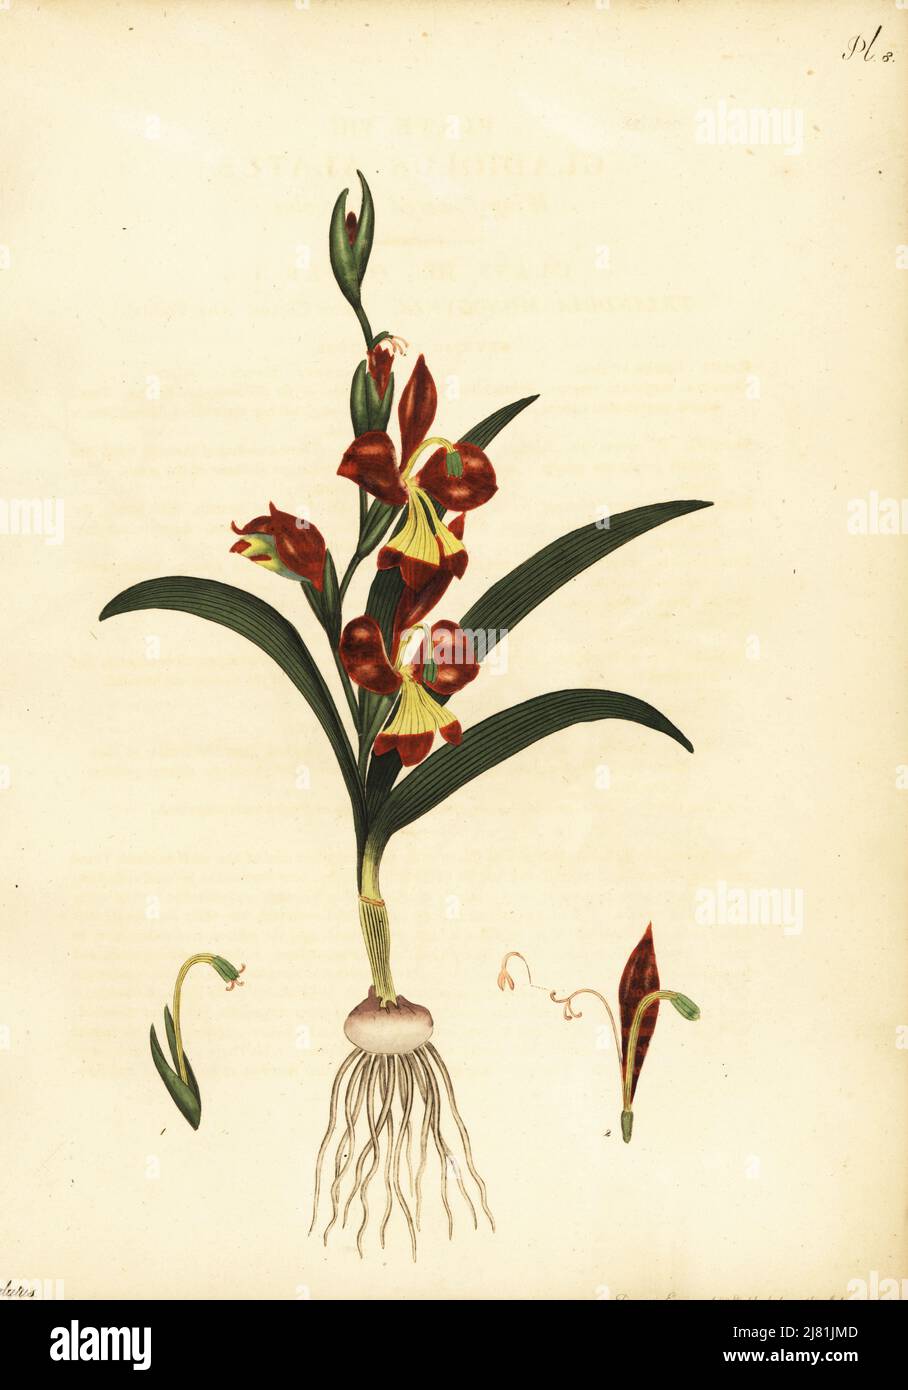 Gladiolus orchidiflorus. Wing-flowered gladiolus, Gladiolus alatus. Copperplate engraving drawn, engraved and hand-coloured by Henry Andrews from his Botanical Register, Volume 1, published in London, 1799. Stock Photo